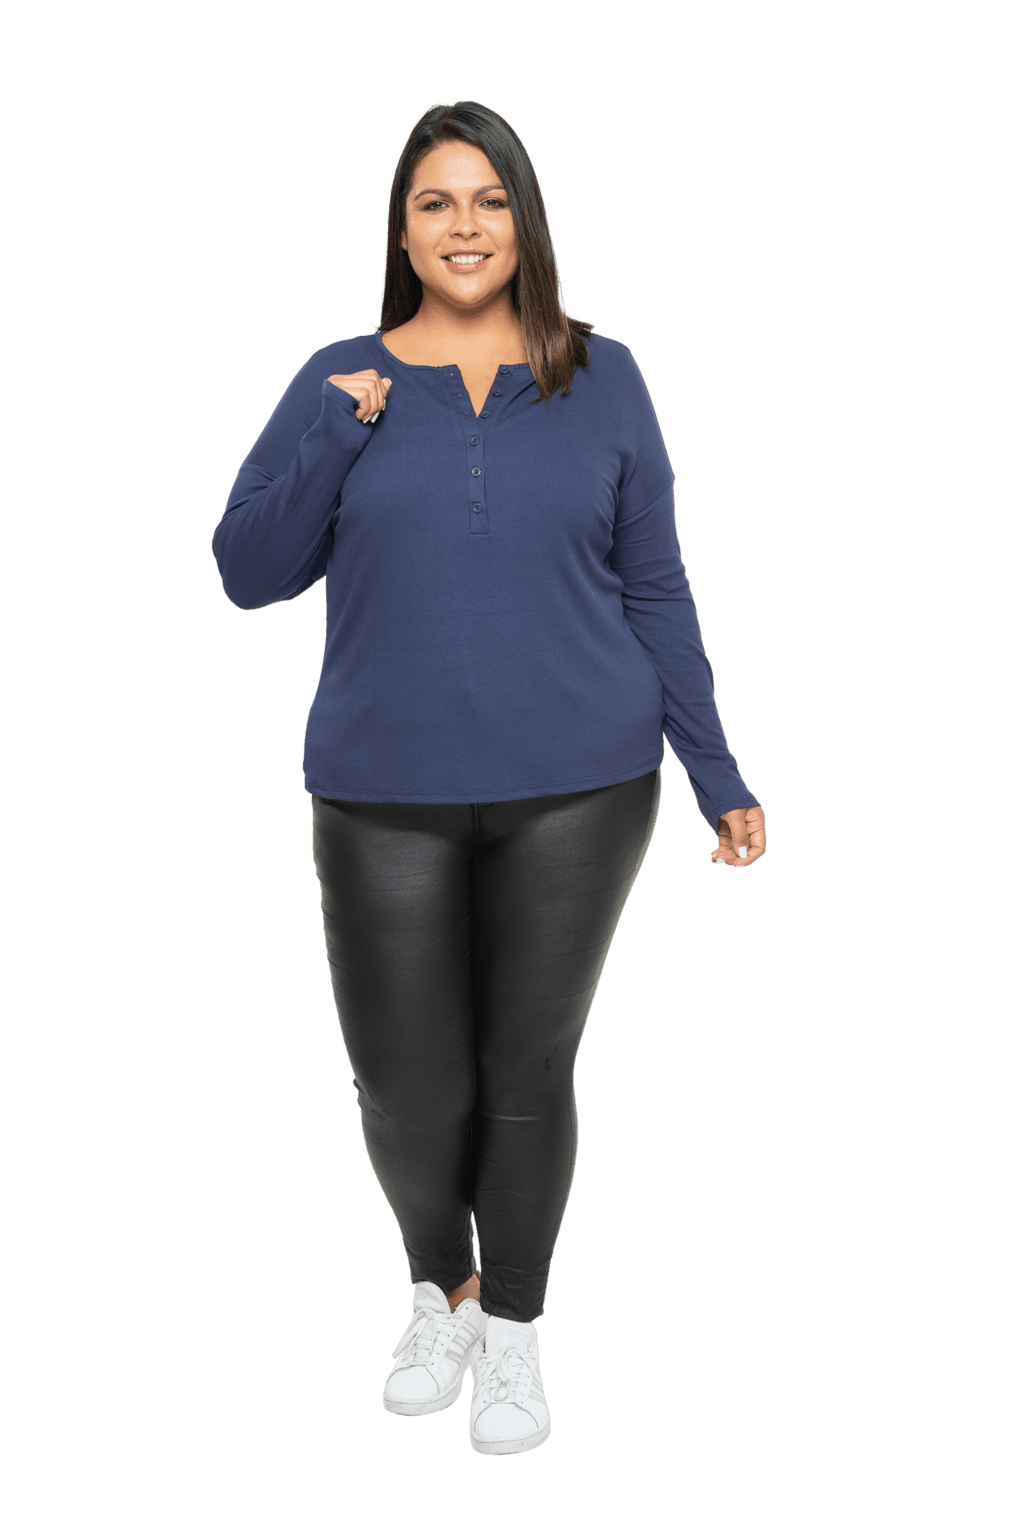 Curvy model facing camera wearing navy blue, long sleeved henley top, slightly unbuttoned. Features button front and dropped shoulder. Hunter available in sizes 6-26